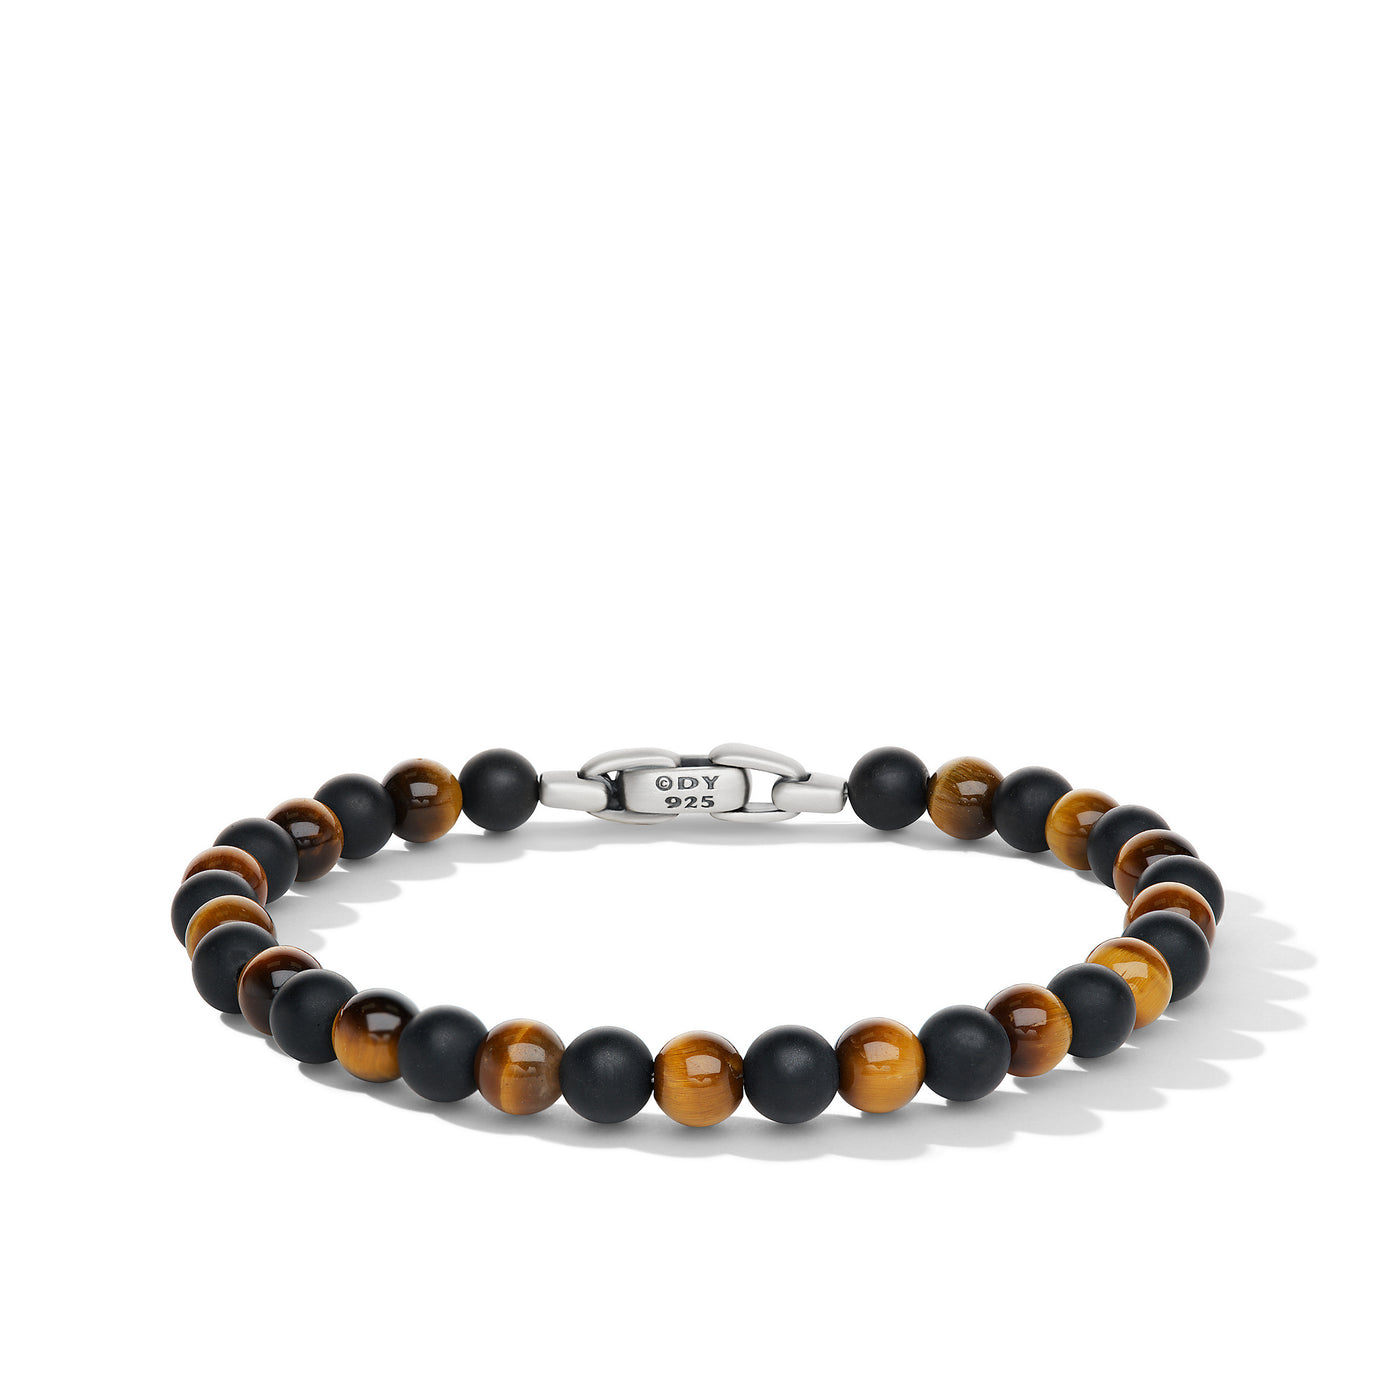 Spiritual Beads Alternating Bracelet in Sterling Silver with Black Onyx and Tigers Eye\, 6mm